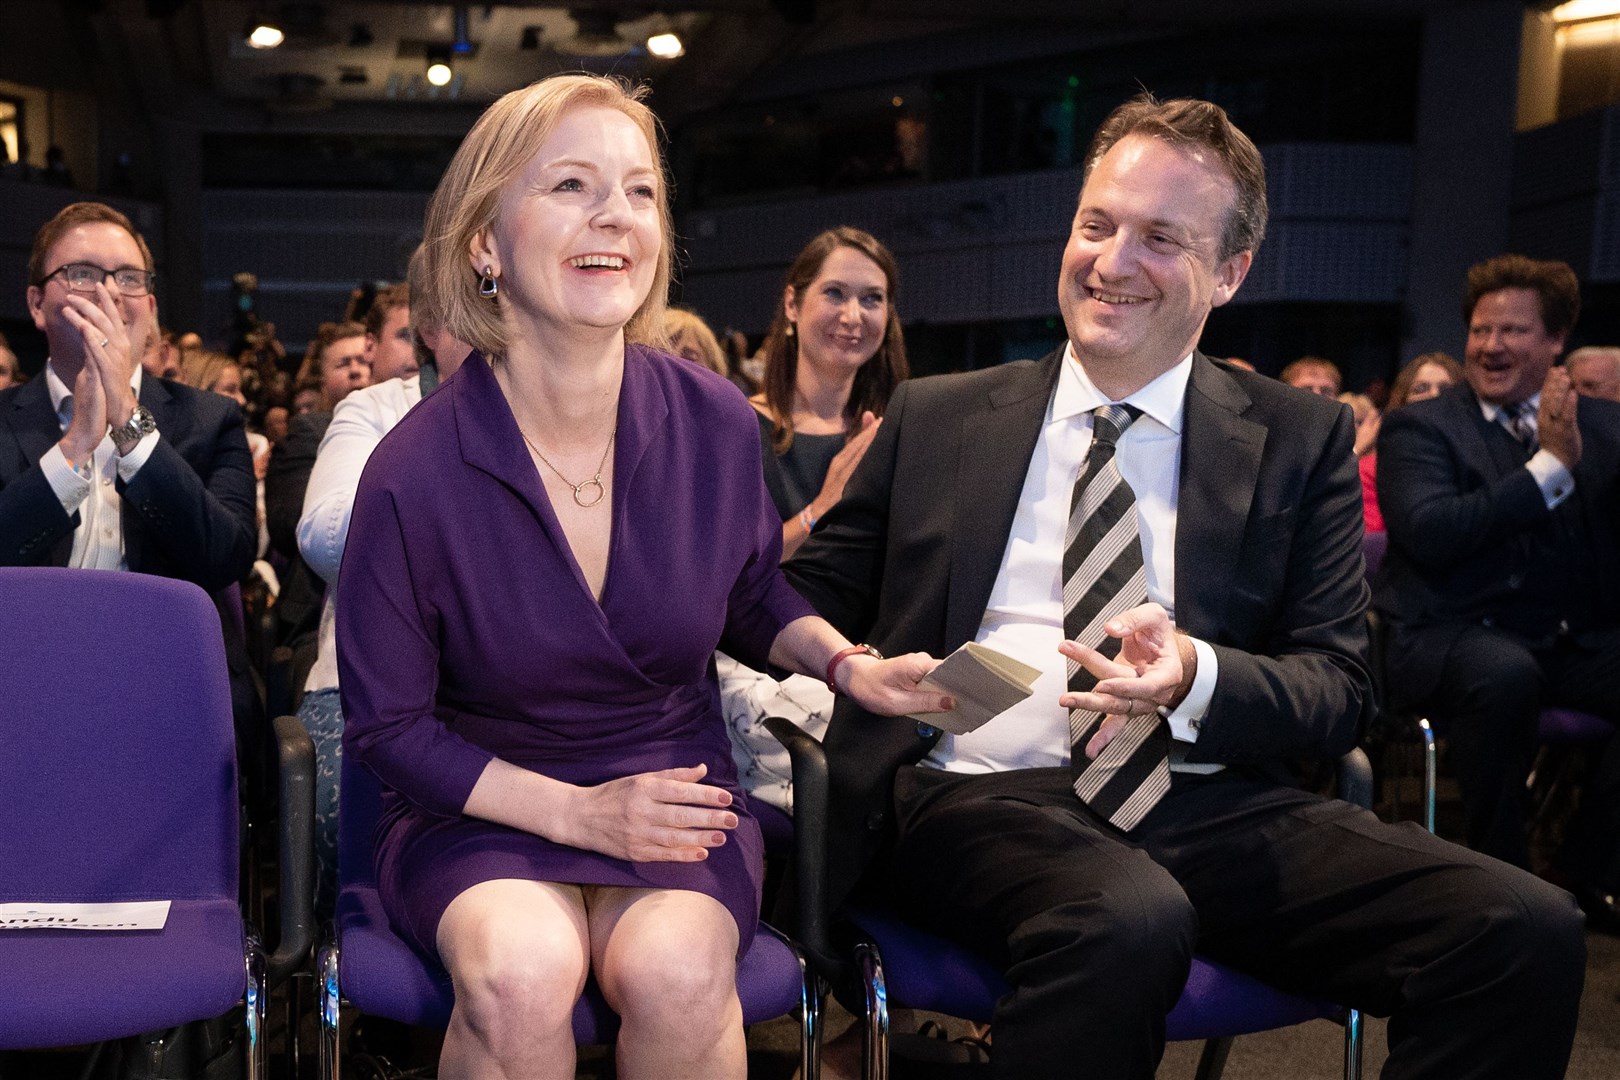 Liz Truss and her husband Hugh O’Leary at the Queen Elizabeth II Centre in London before the announcement of the Conservative Party leadership contest (Stefan Rousseau/PA)